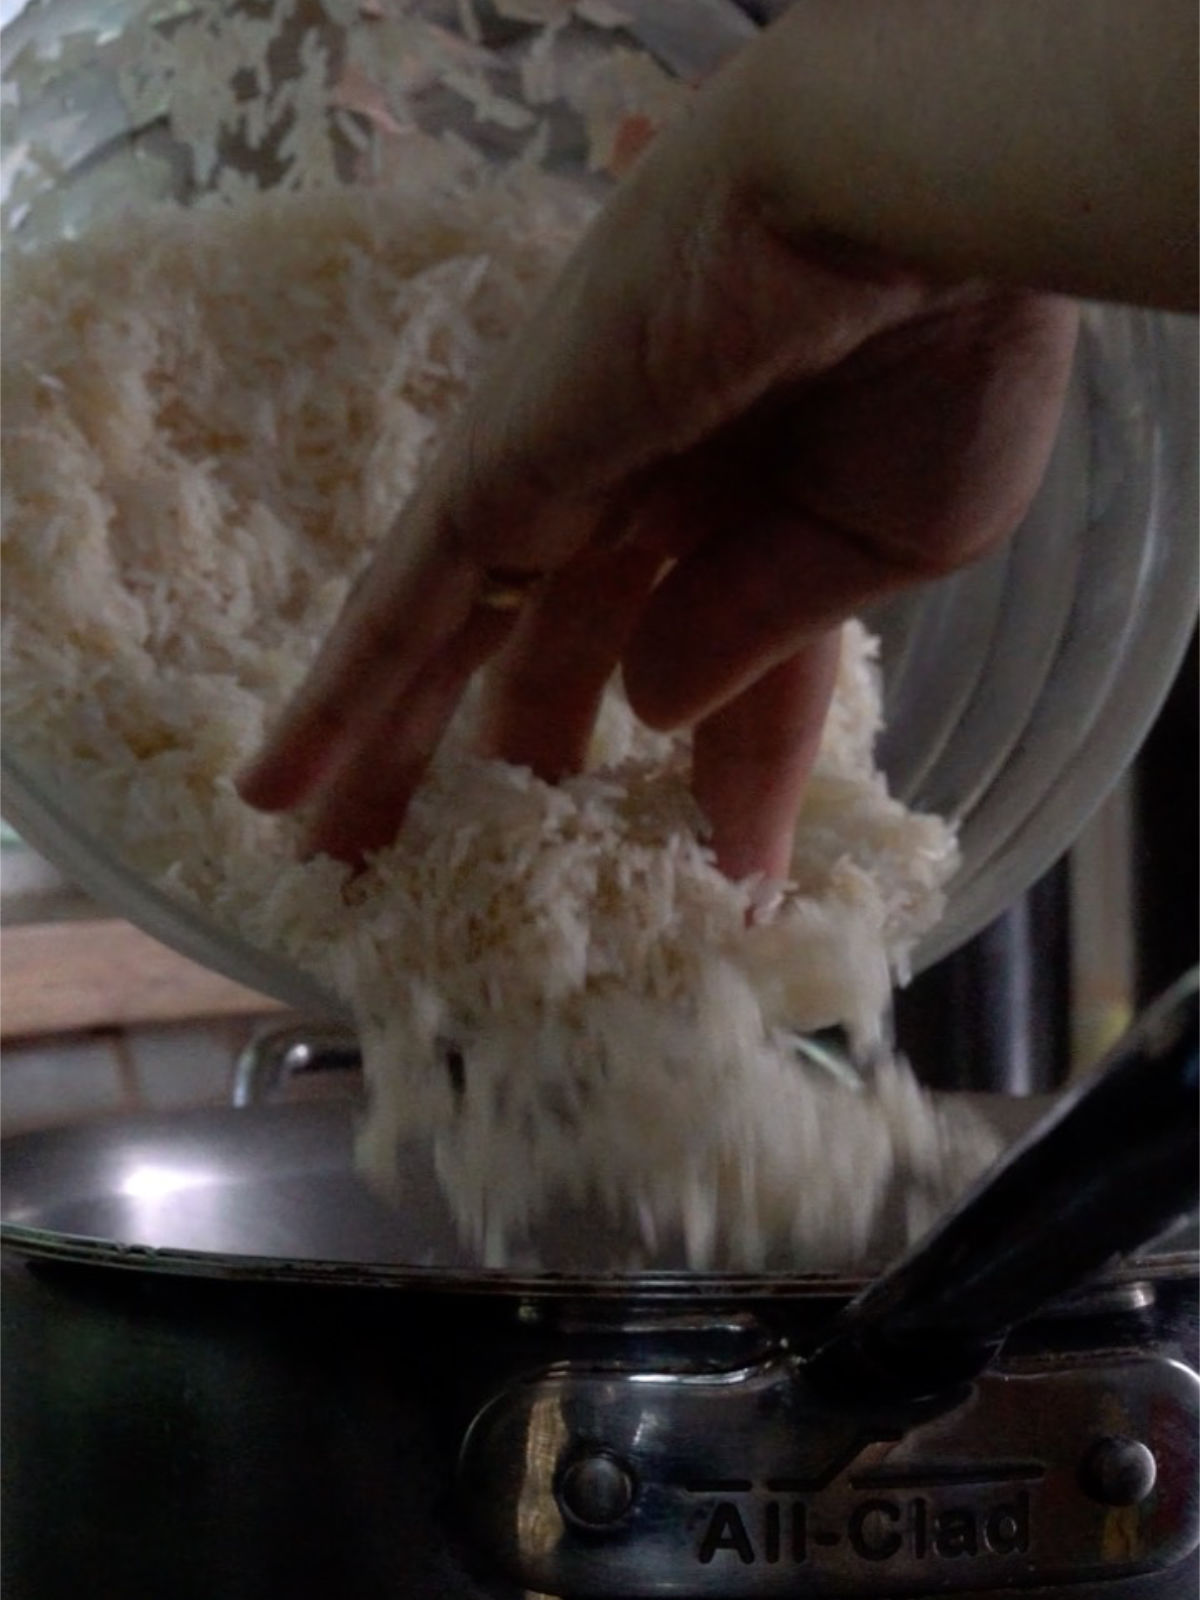 Pouring rice from a glass bowl into a metal pot.